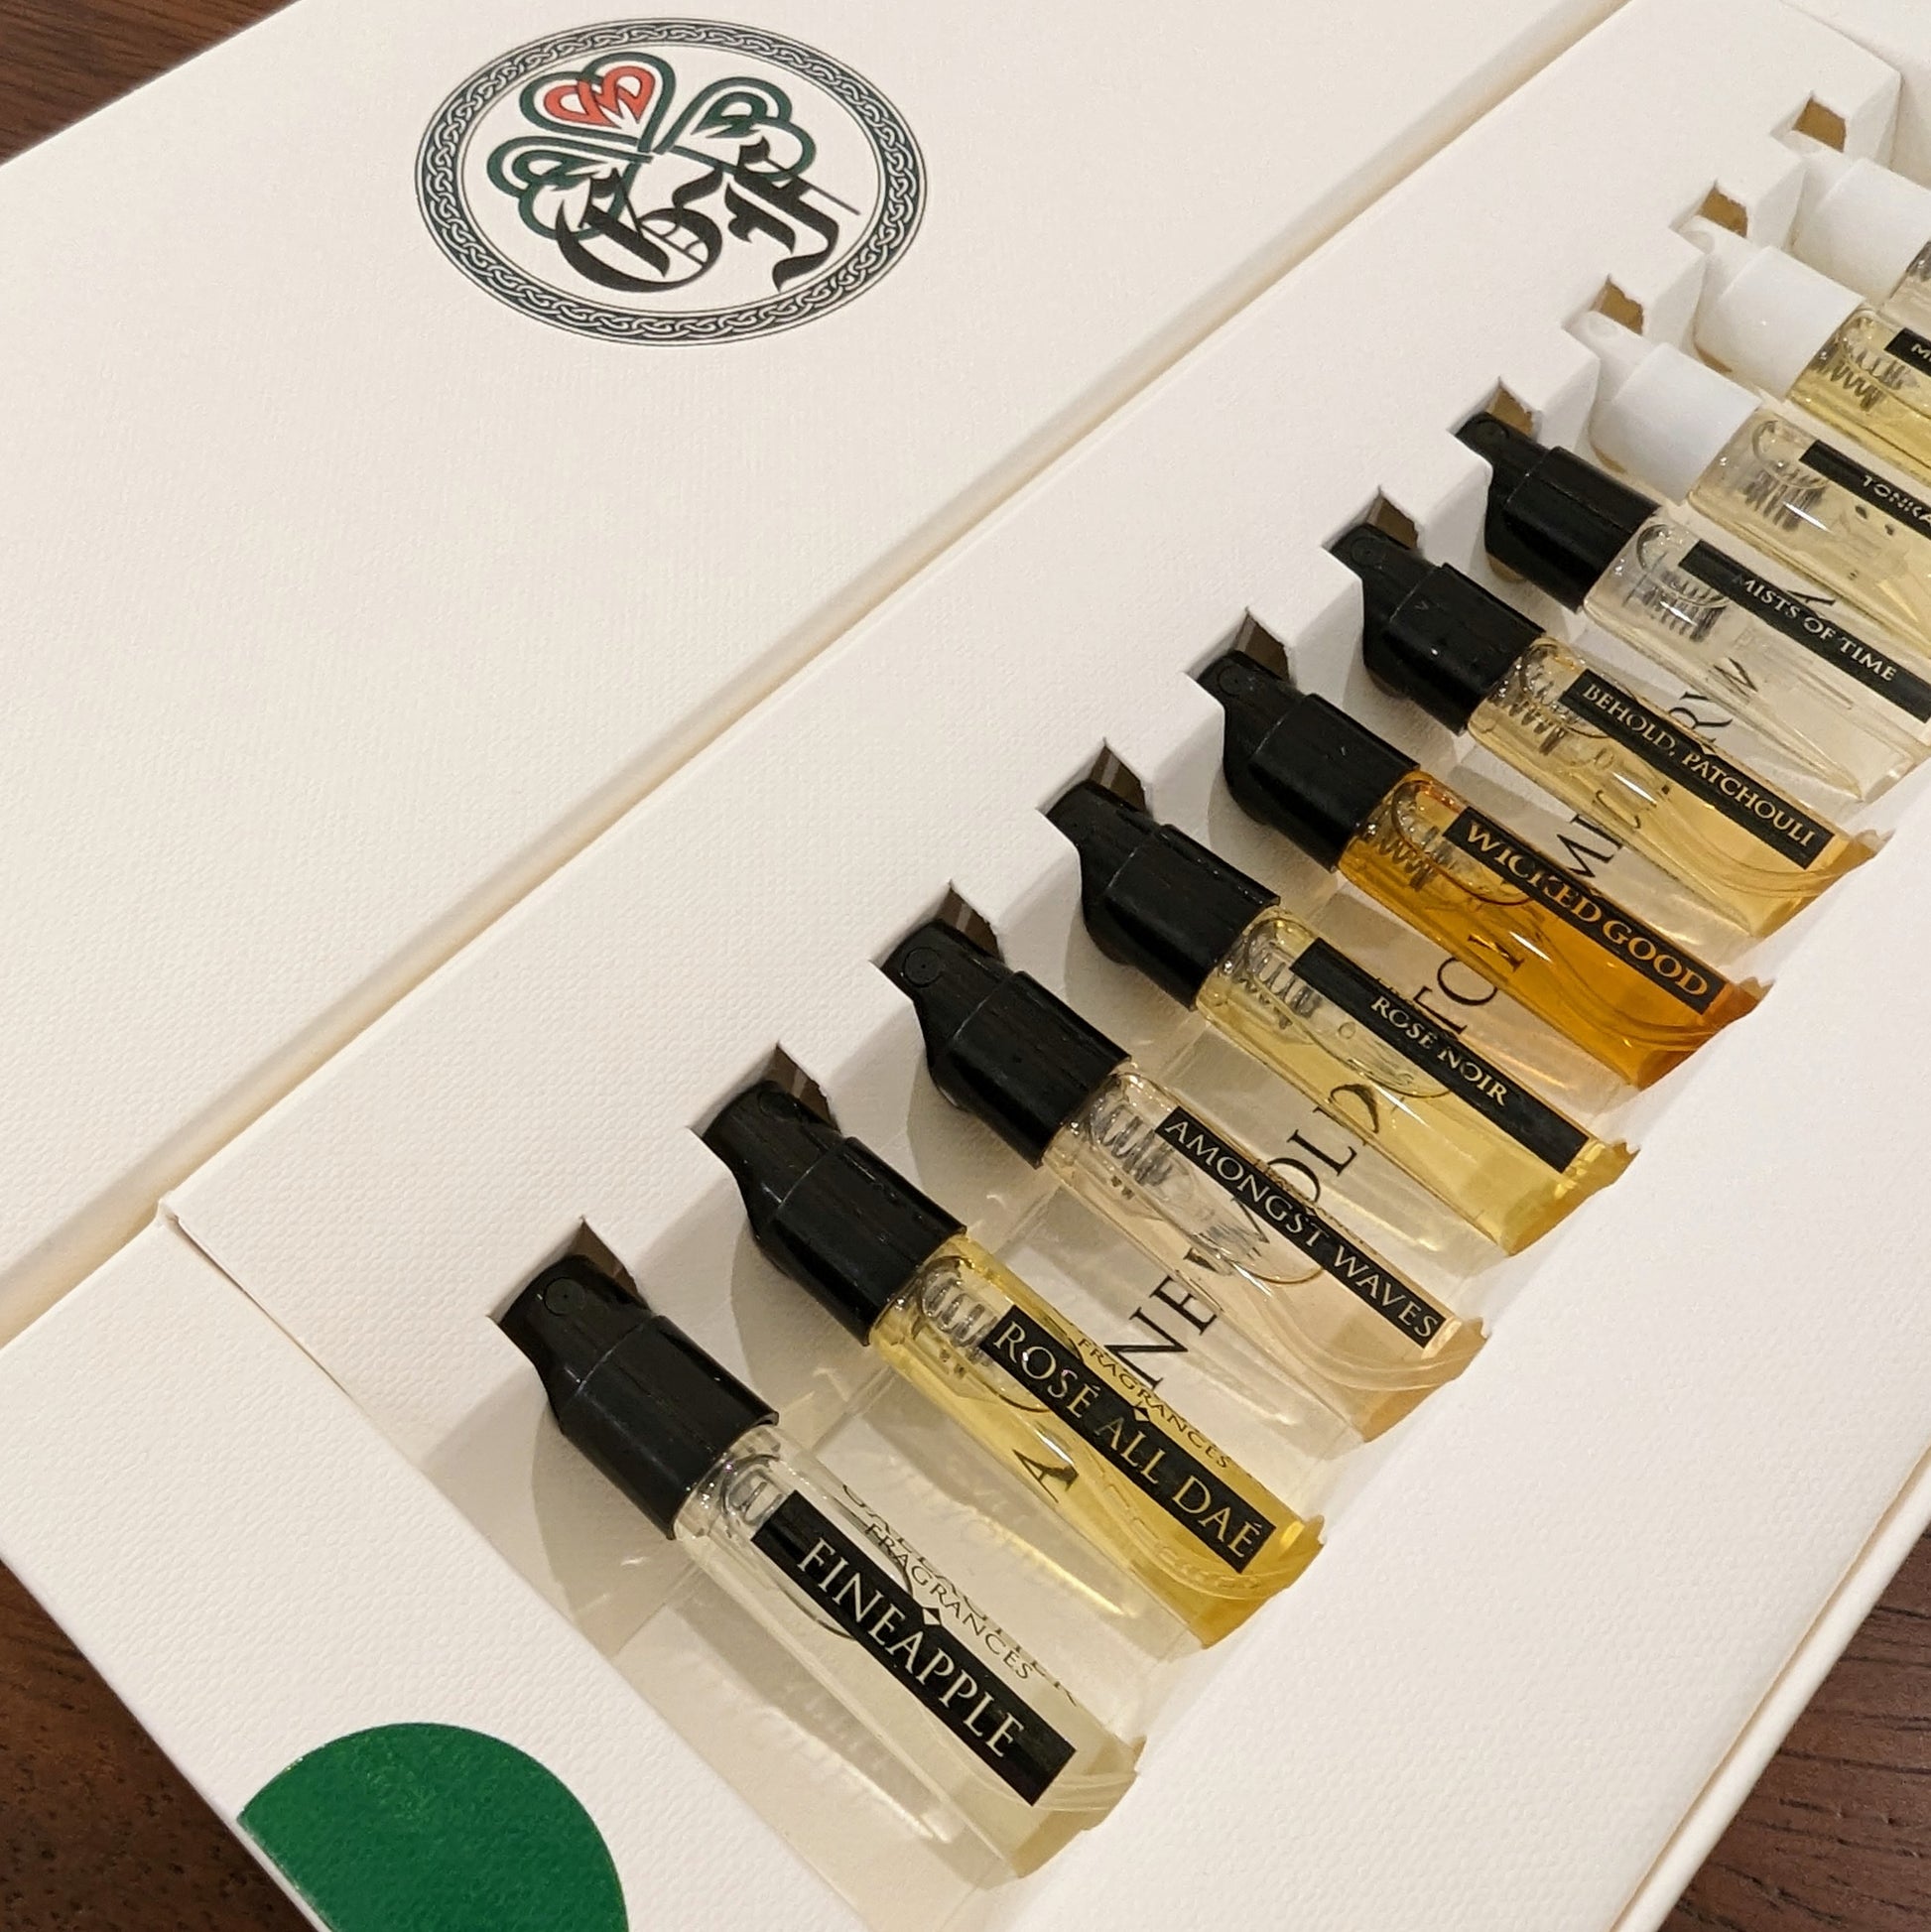 The Top 10 Sample Set- Sample our 10 best sellers – Gallagher Fragrances